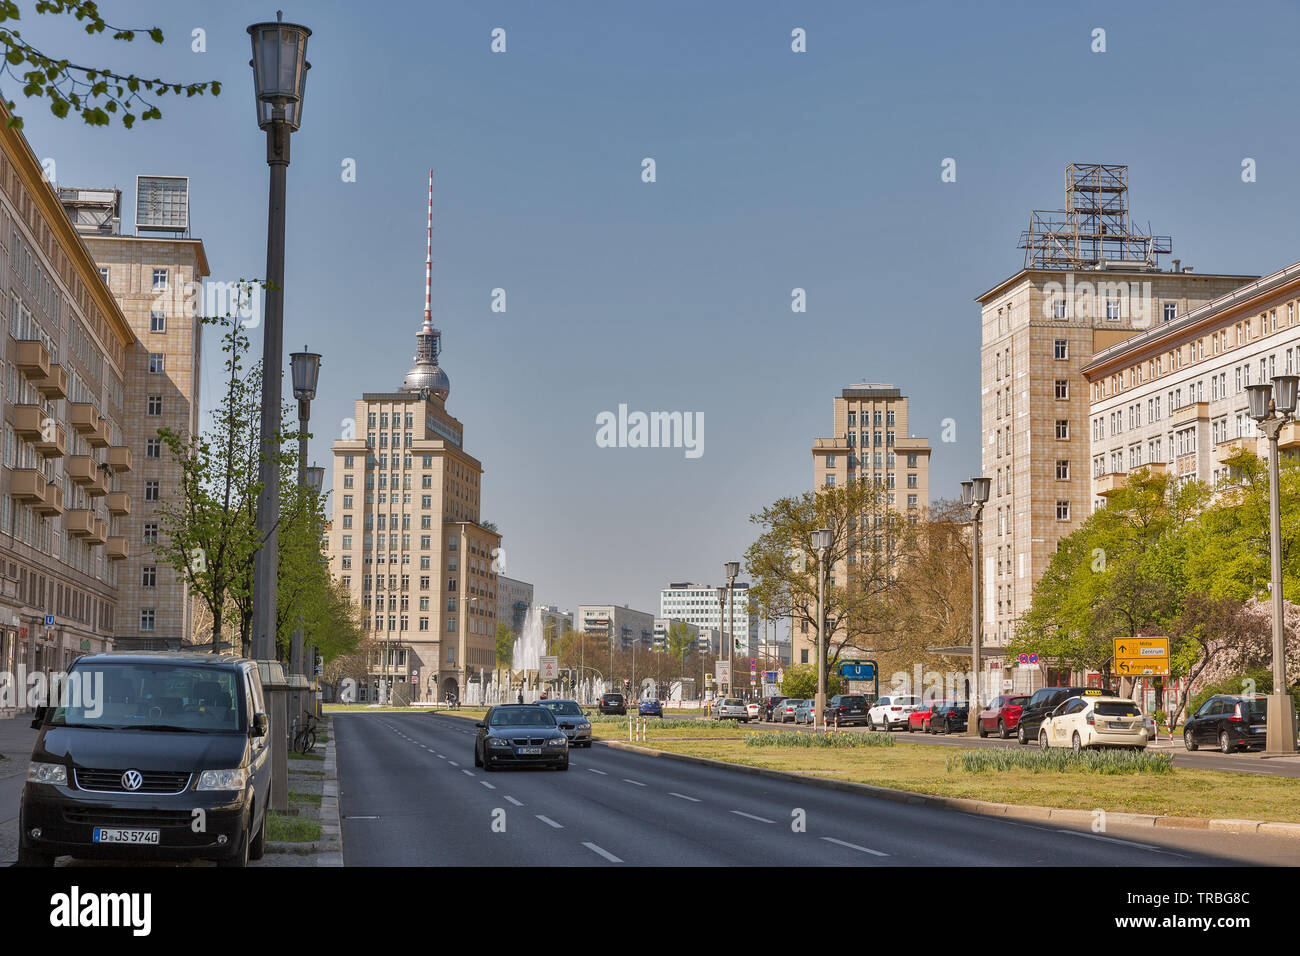 BERLIN, GERMANY - APRIL 18, 2019: Street traffic on Strausberger Platz and Karl Marx alley in downtown. Berlin is the capital and largest city of Germ Stock Photo